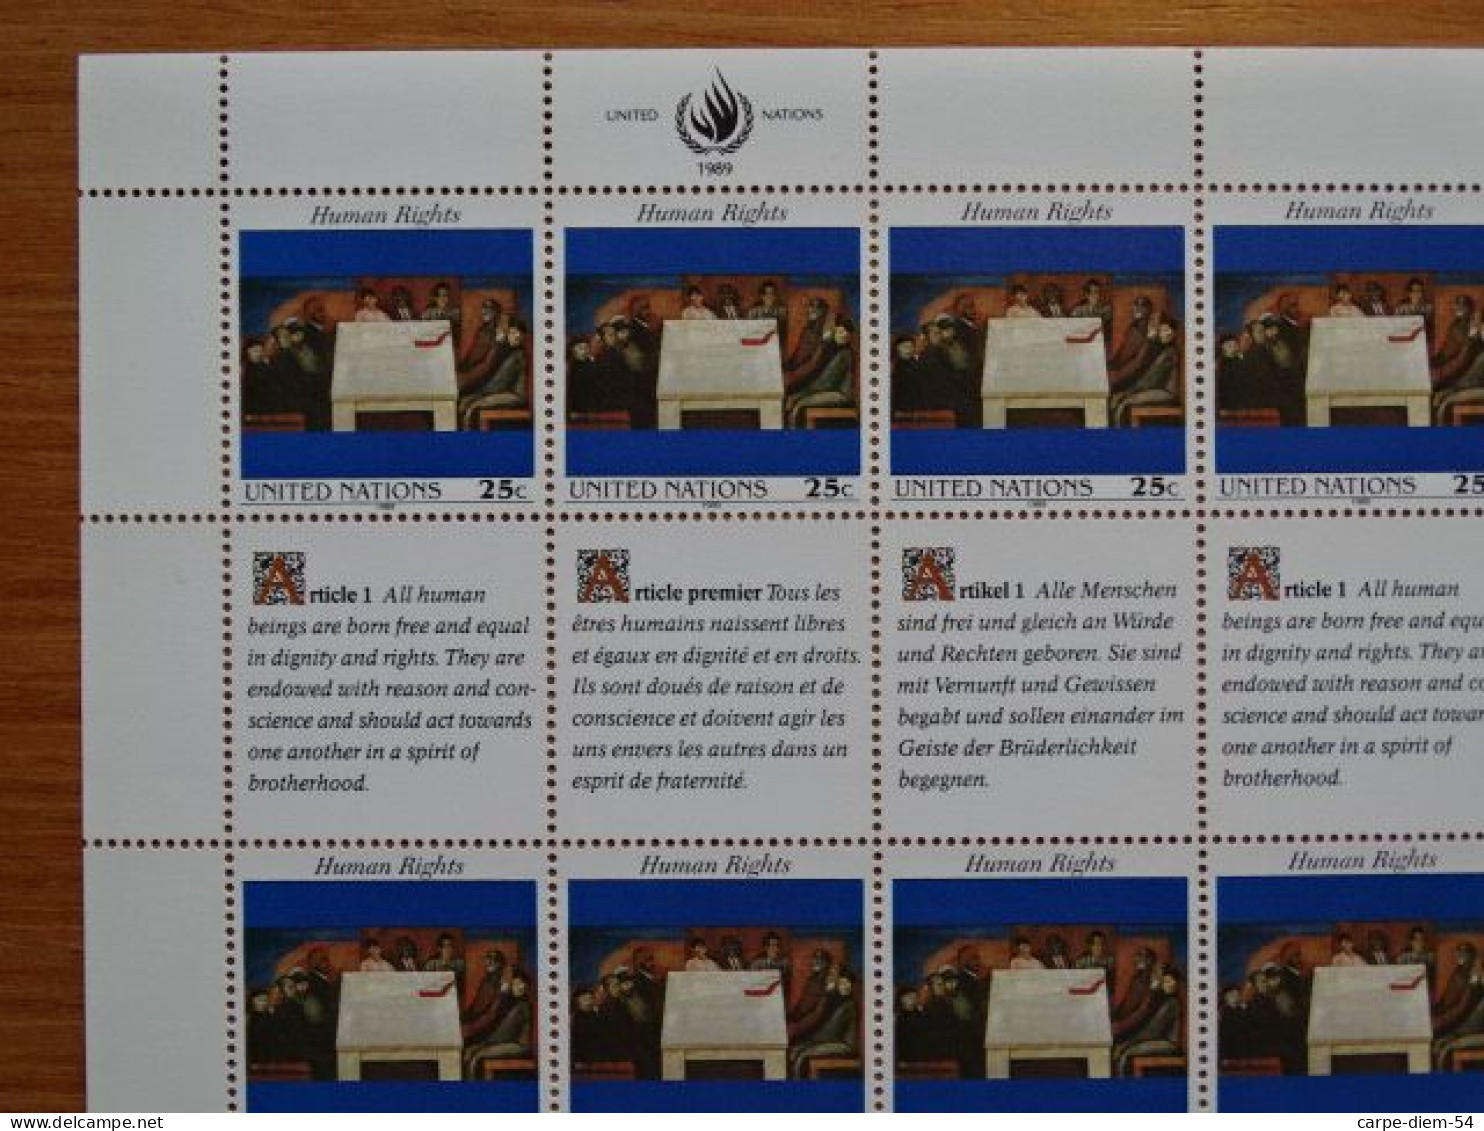 United Nations - Vereinte Nationen - Bloc / Feuillet 12 Timbres - Human Rights - Article 1 - 1989 - Lots & Serien